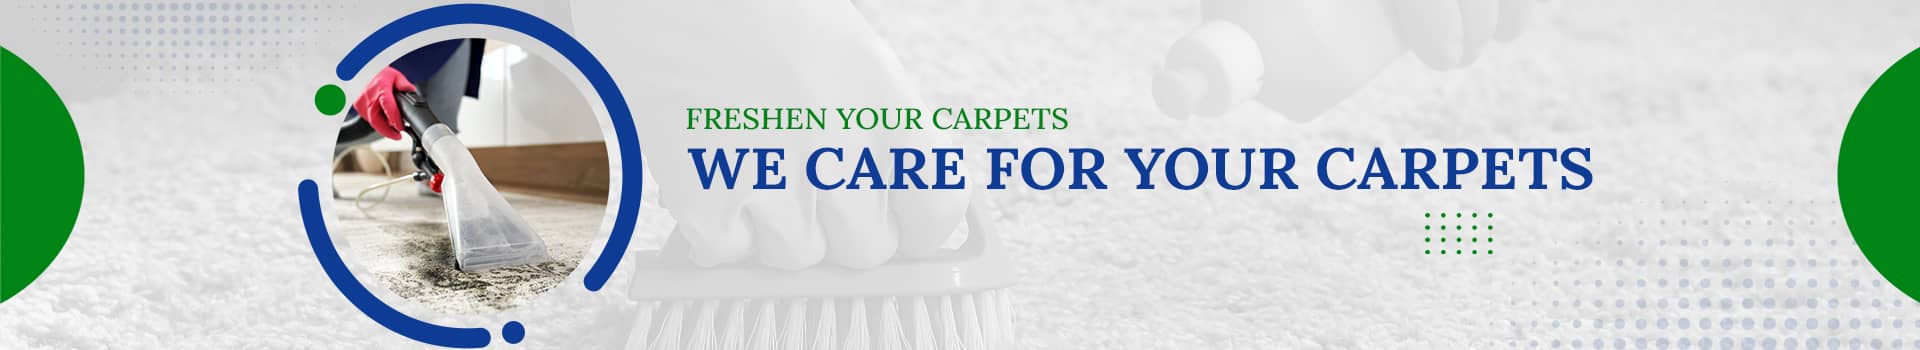 Carpet Cleaning Services - UPkeepcity